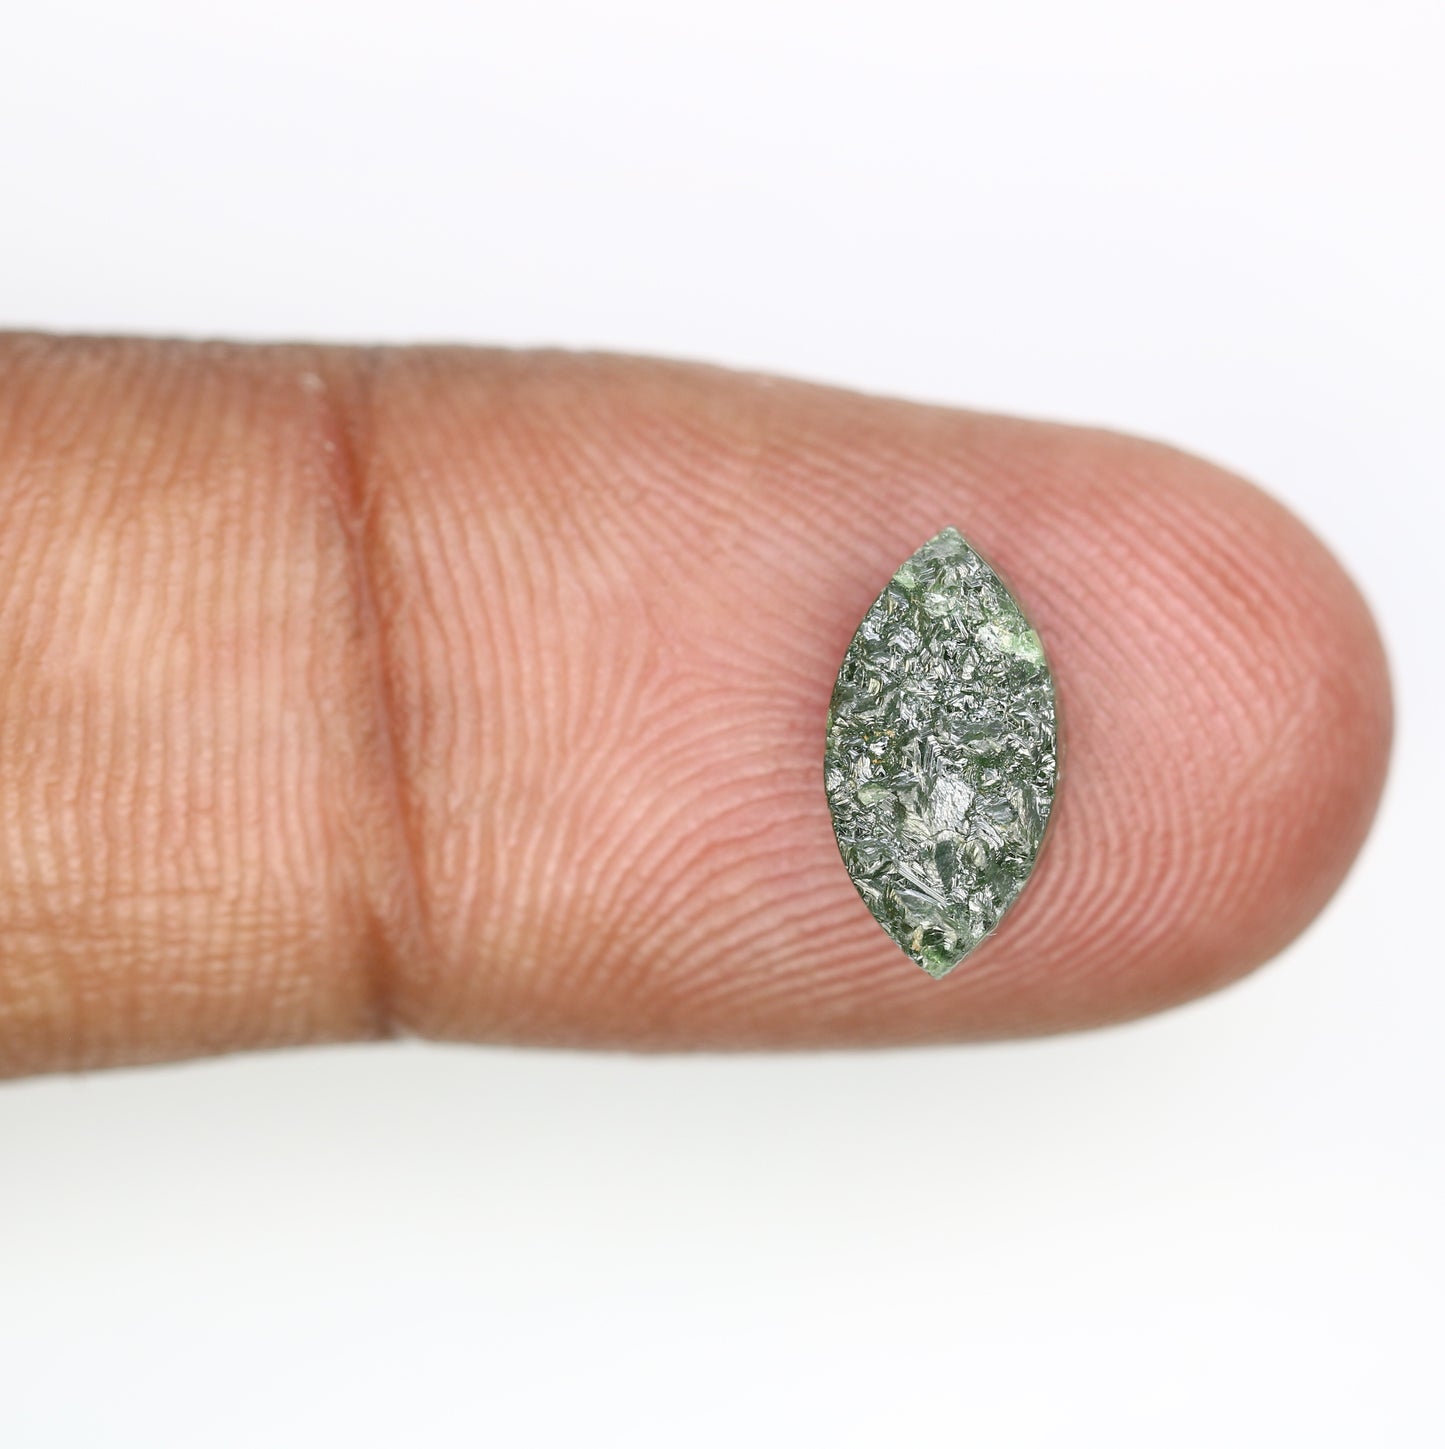 2.55 Carat Natural Loose Marquise Shape Green Color Rough Diamond